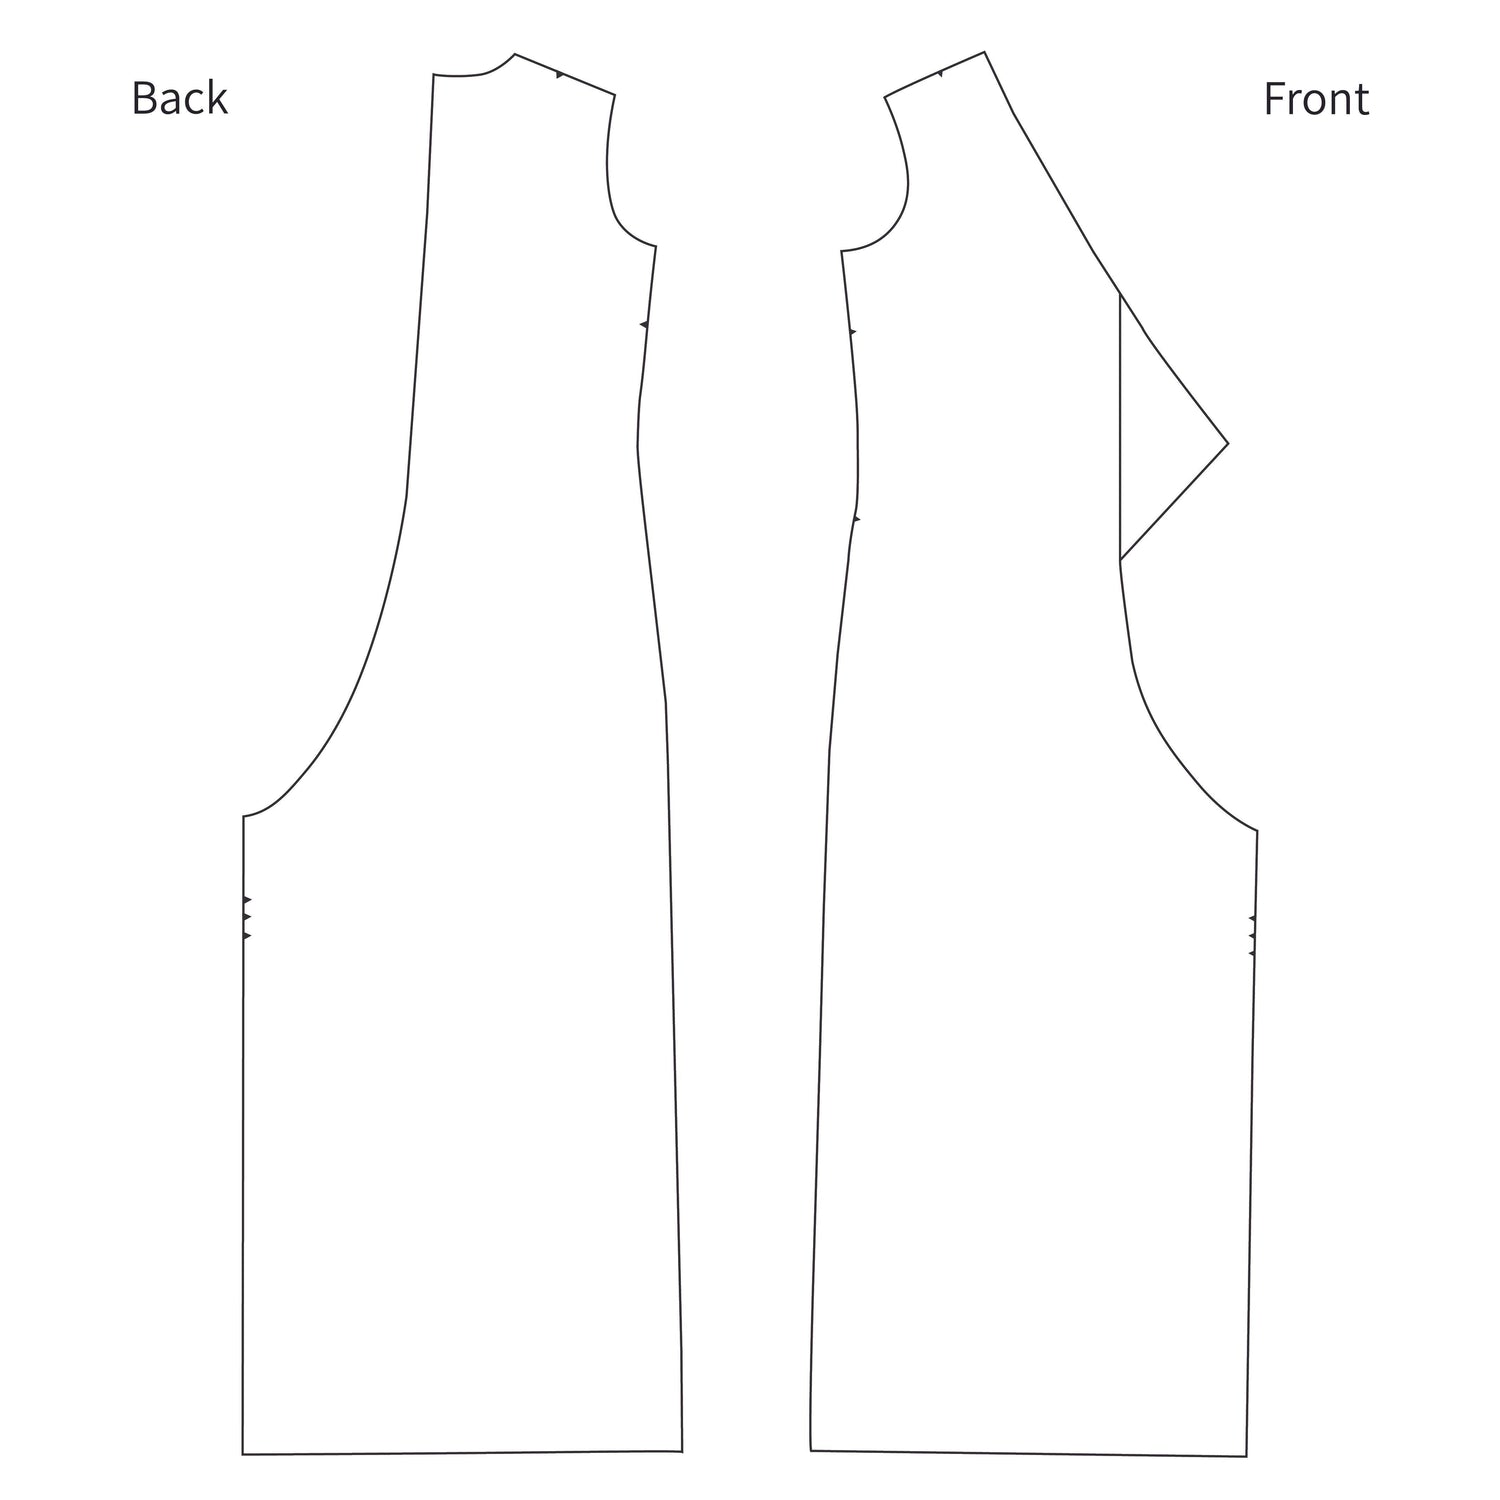 Line drawing of all pattern pieces included in this pattern.